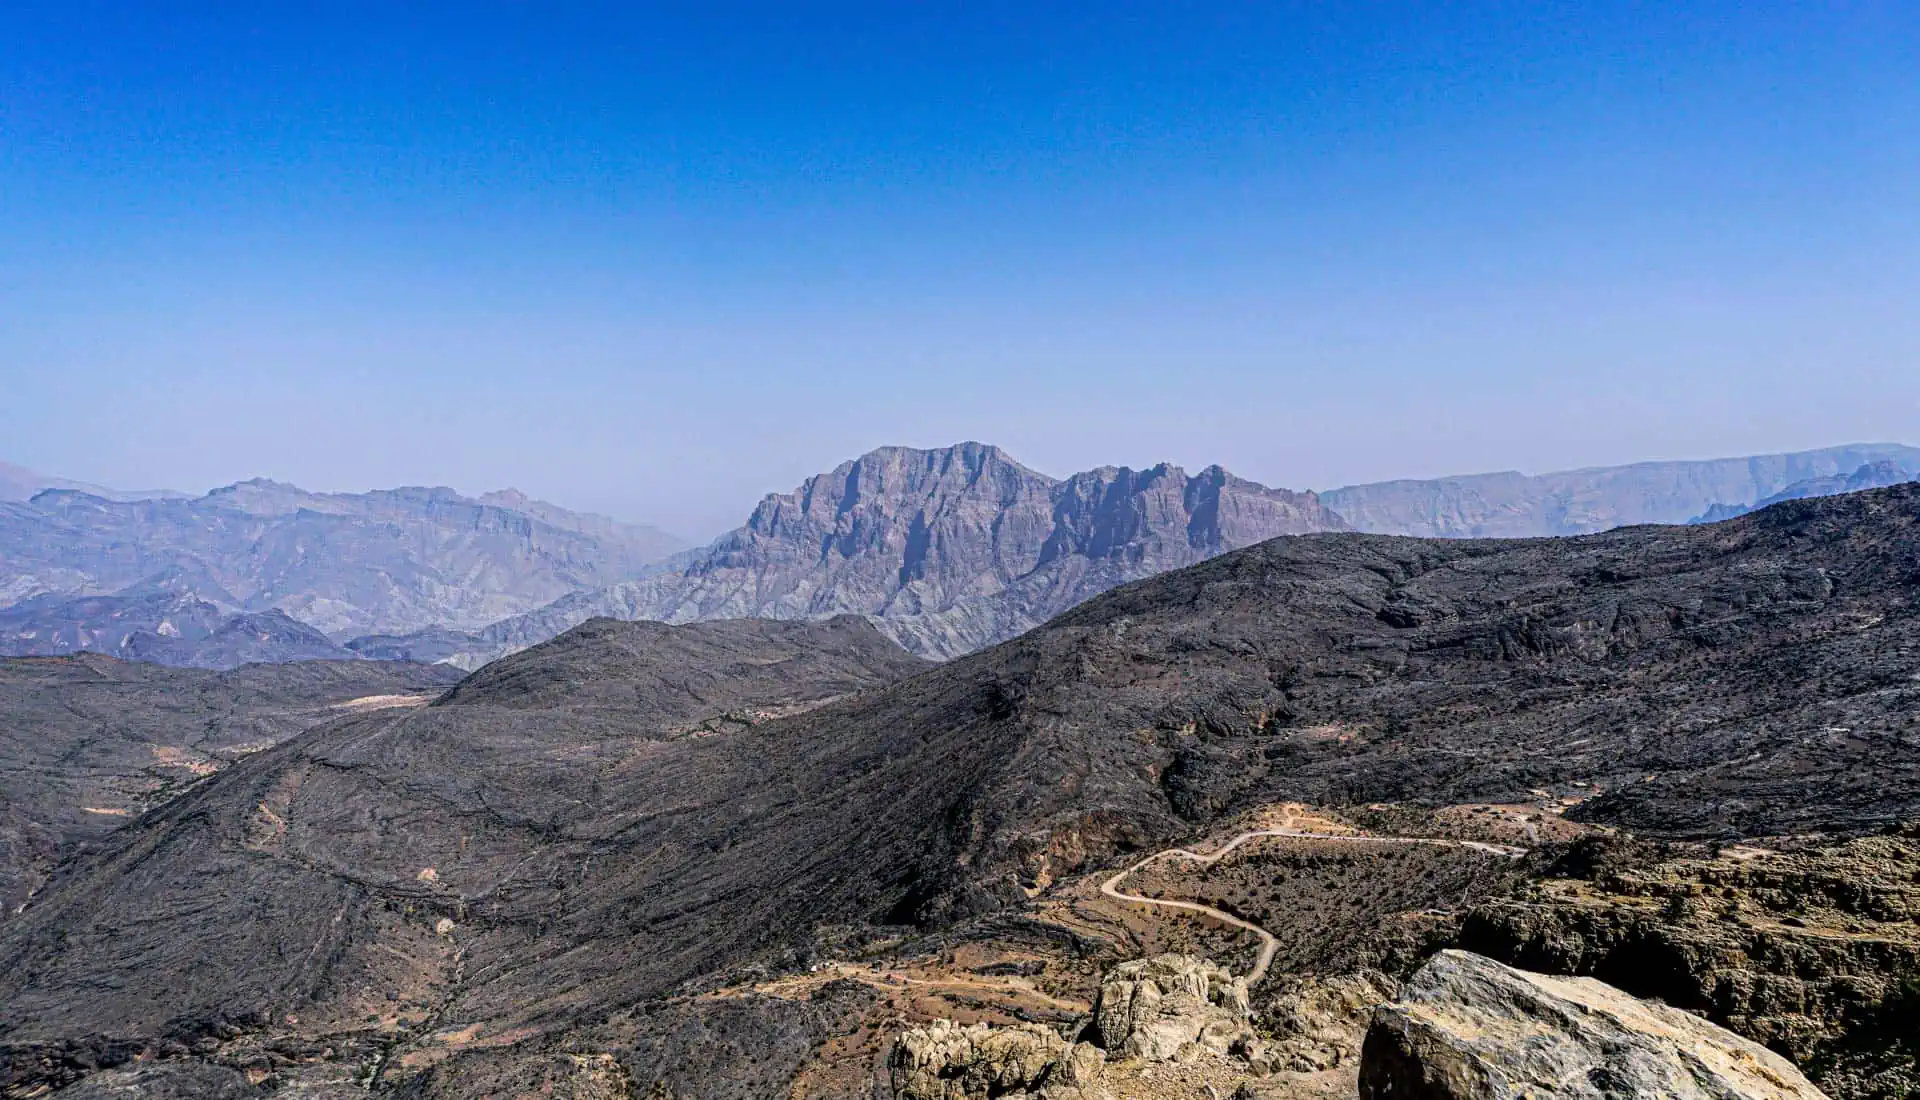 Enjoy jaw dropping views when you take the off-road route across the Al Hajar Mountains in Oman.